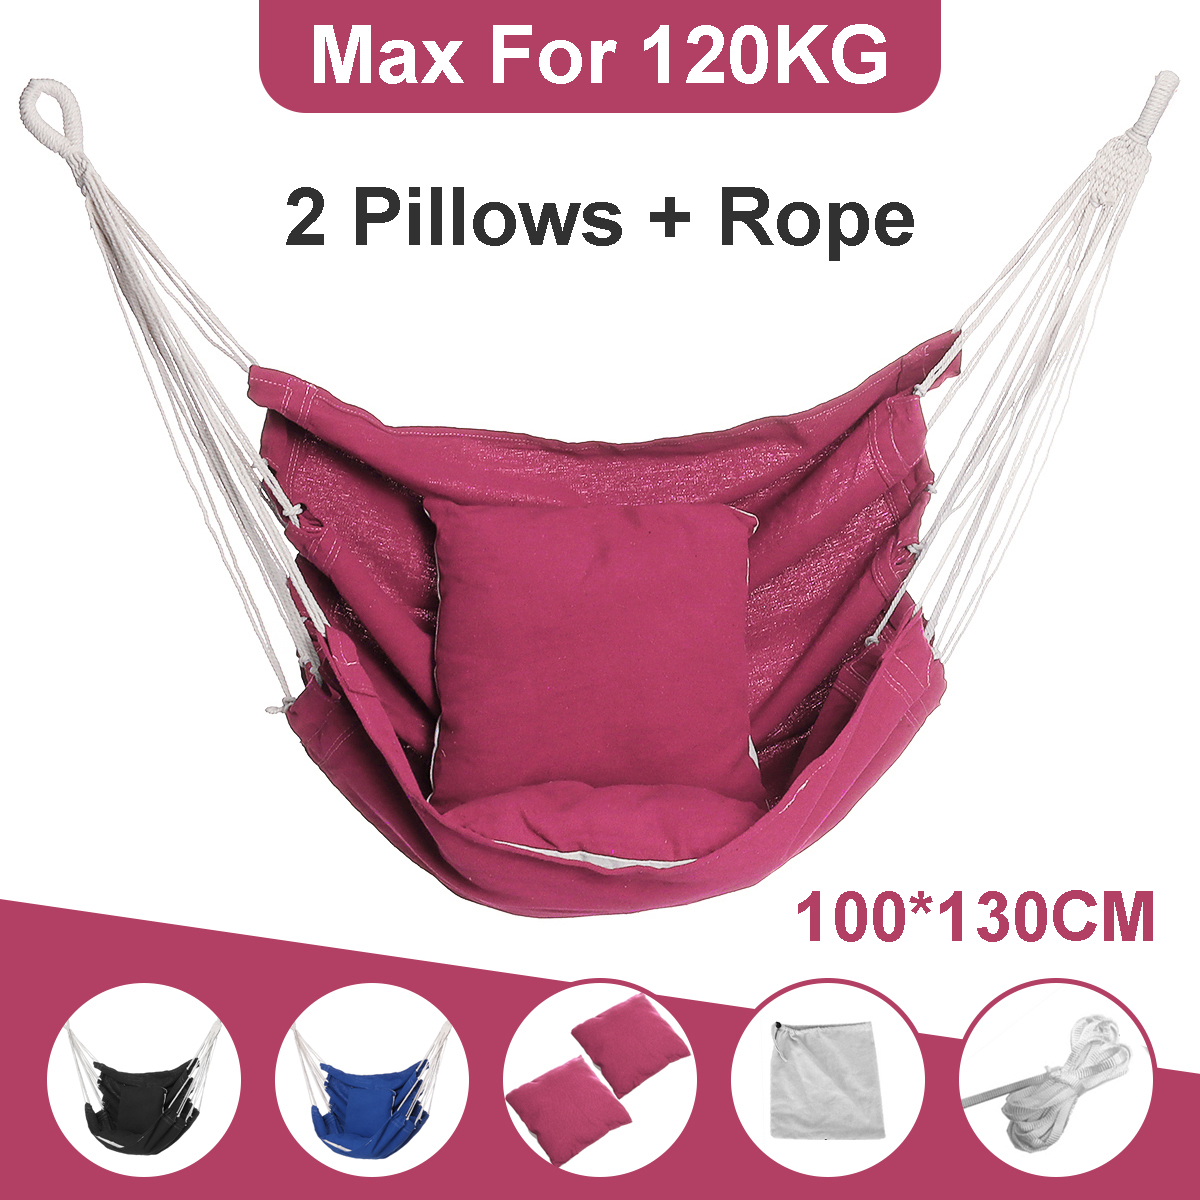 Camping-Hammock-Chair-Swing-Seat-Indoor-Outdoor-Folding-Hanging-Chair-with-Ropes-Pillow-1711690-1